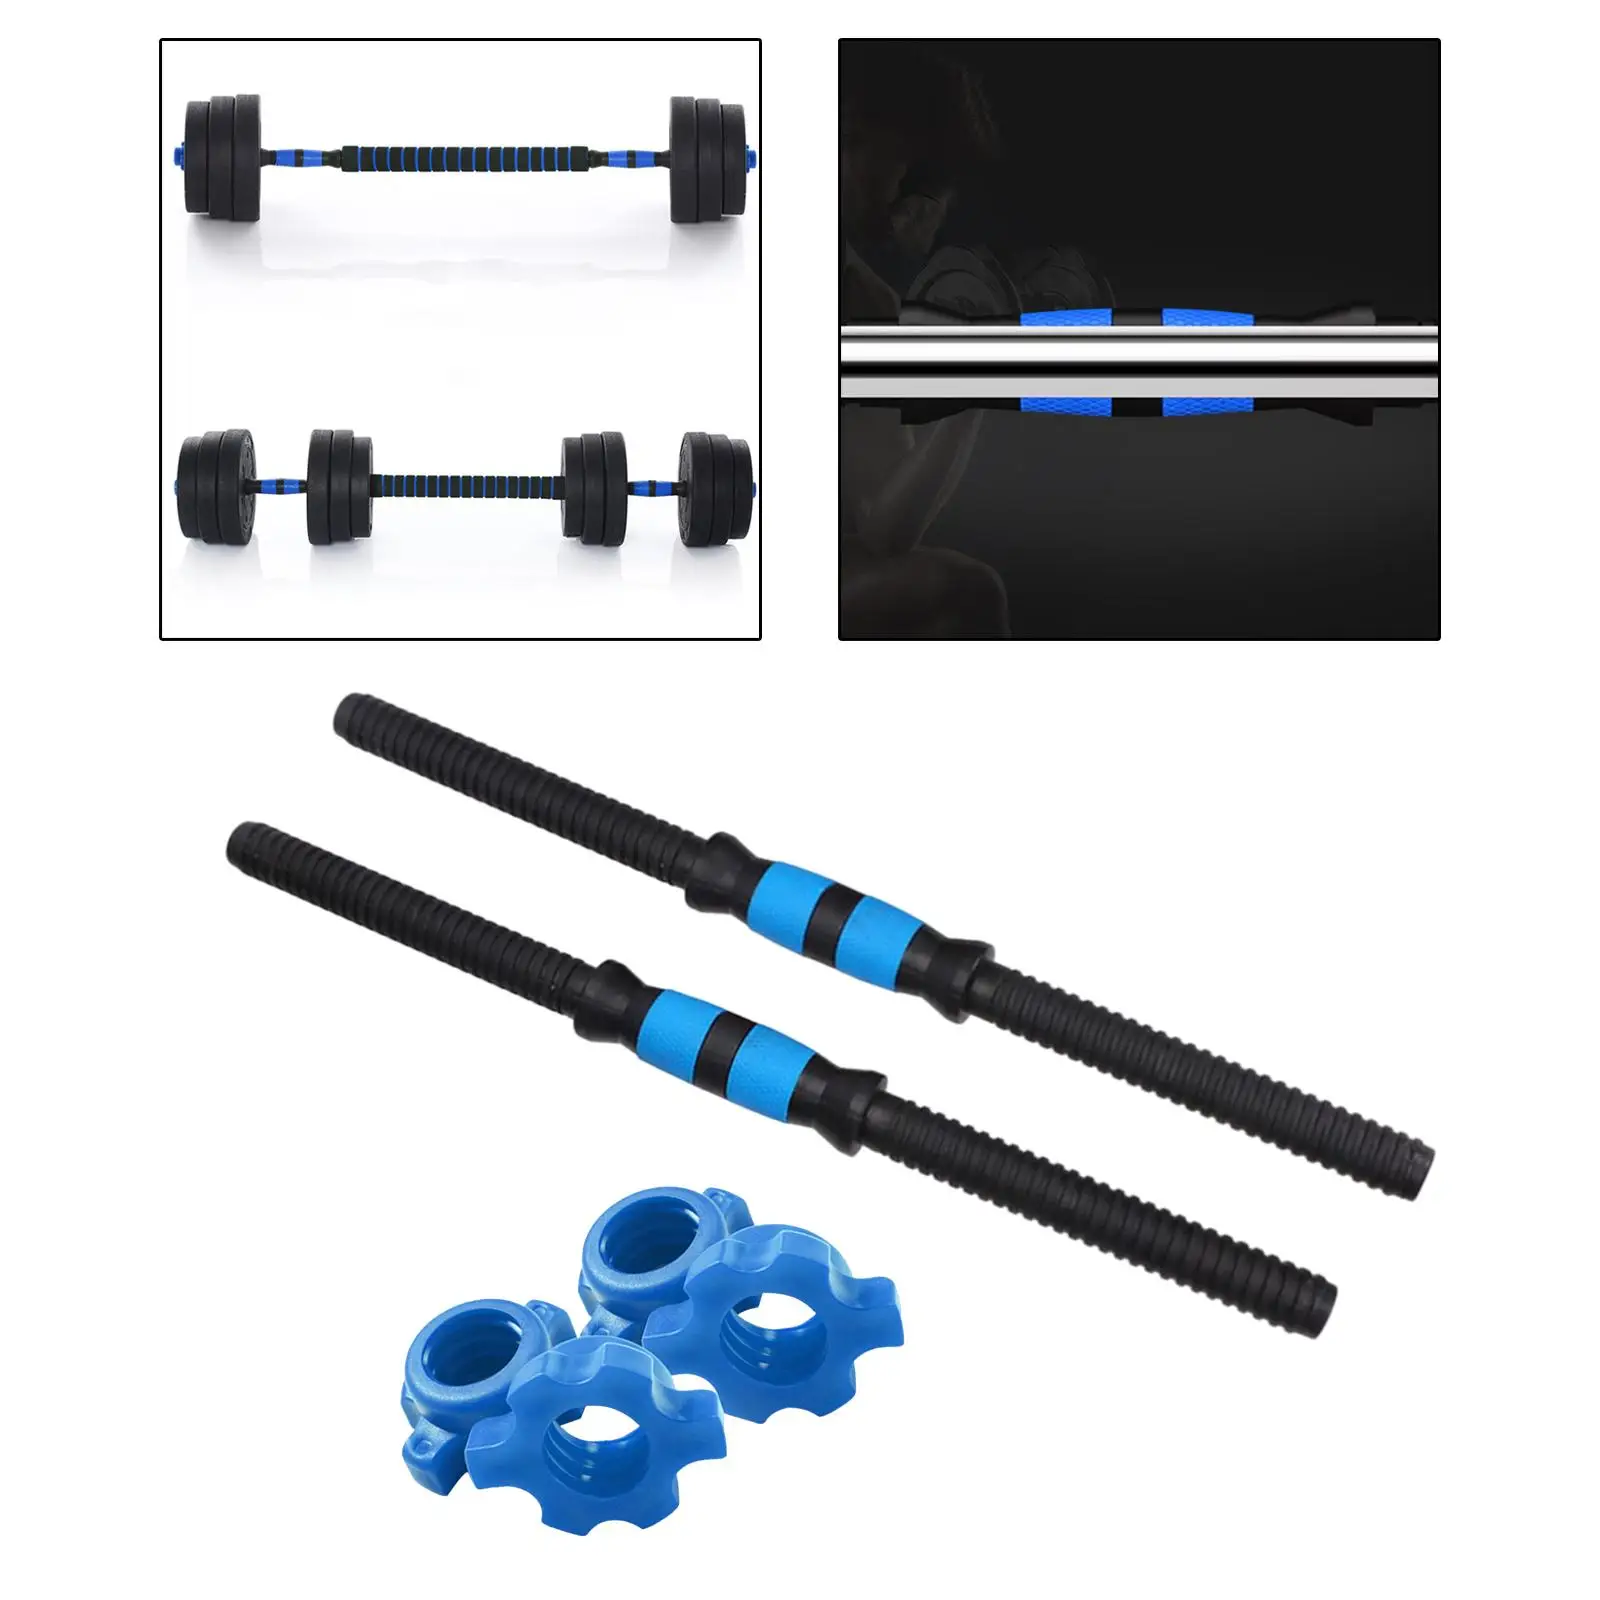 Dumbbells Barbell Set Adjustable Practical Steel Barbell Lifting for Exercise workout and fitness Gym Home